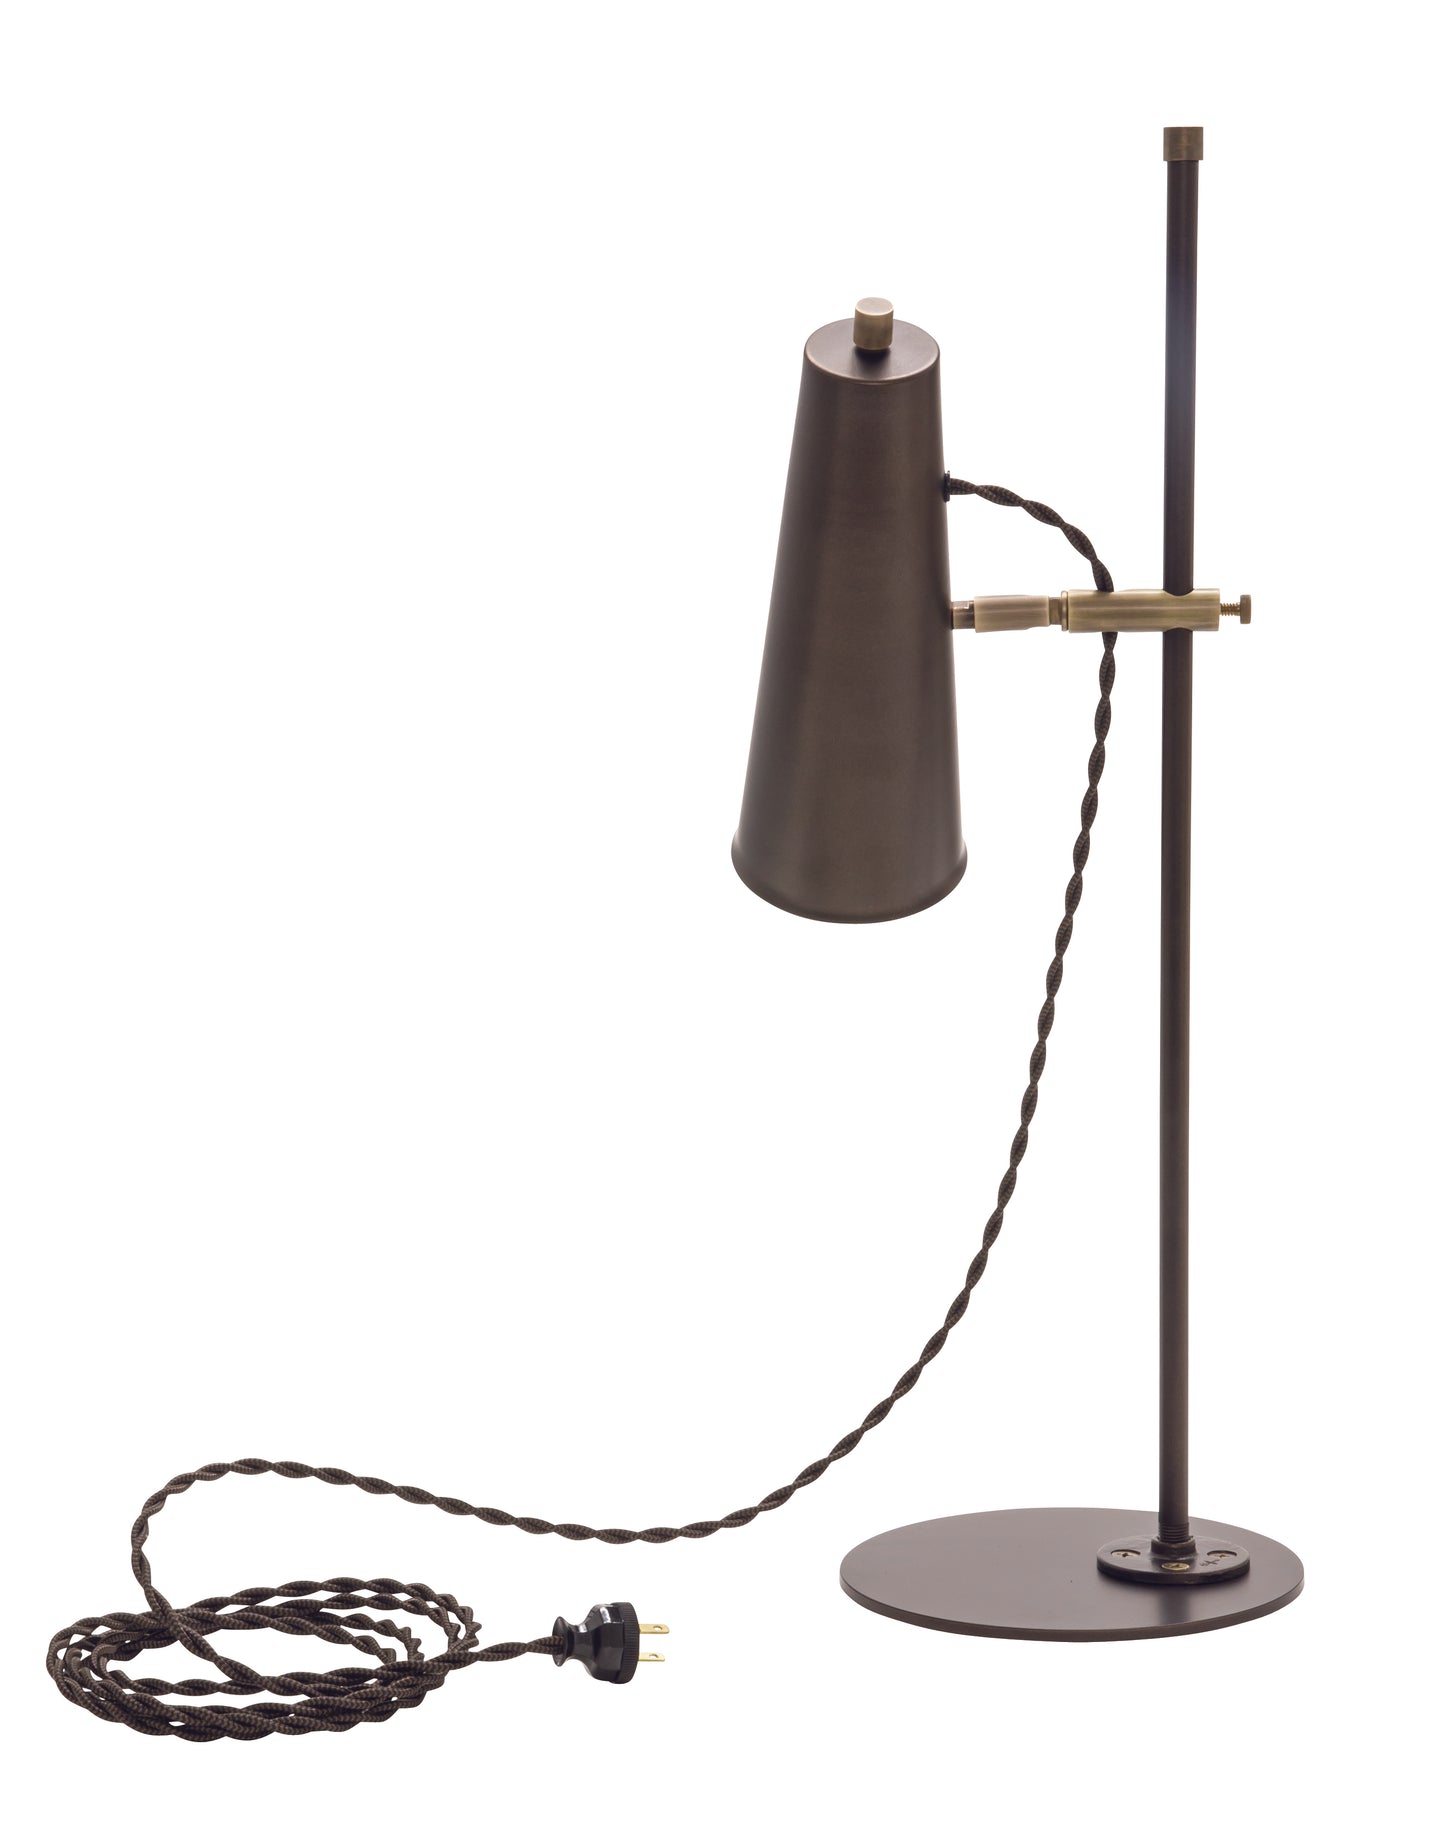 House of Troy Norton Adjustable LED Table Lamp in Chestnut Bronze with Antique Brass Accents NOR350-CHBAB